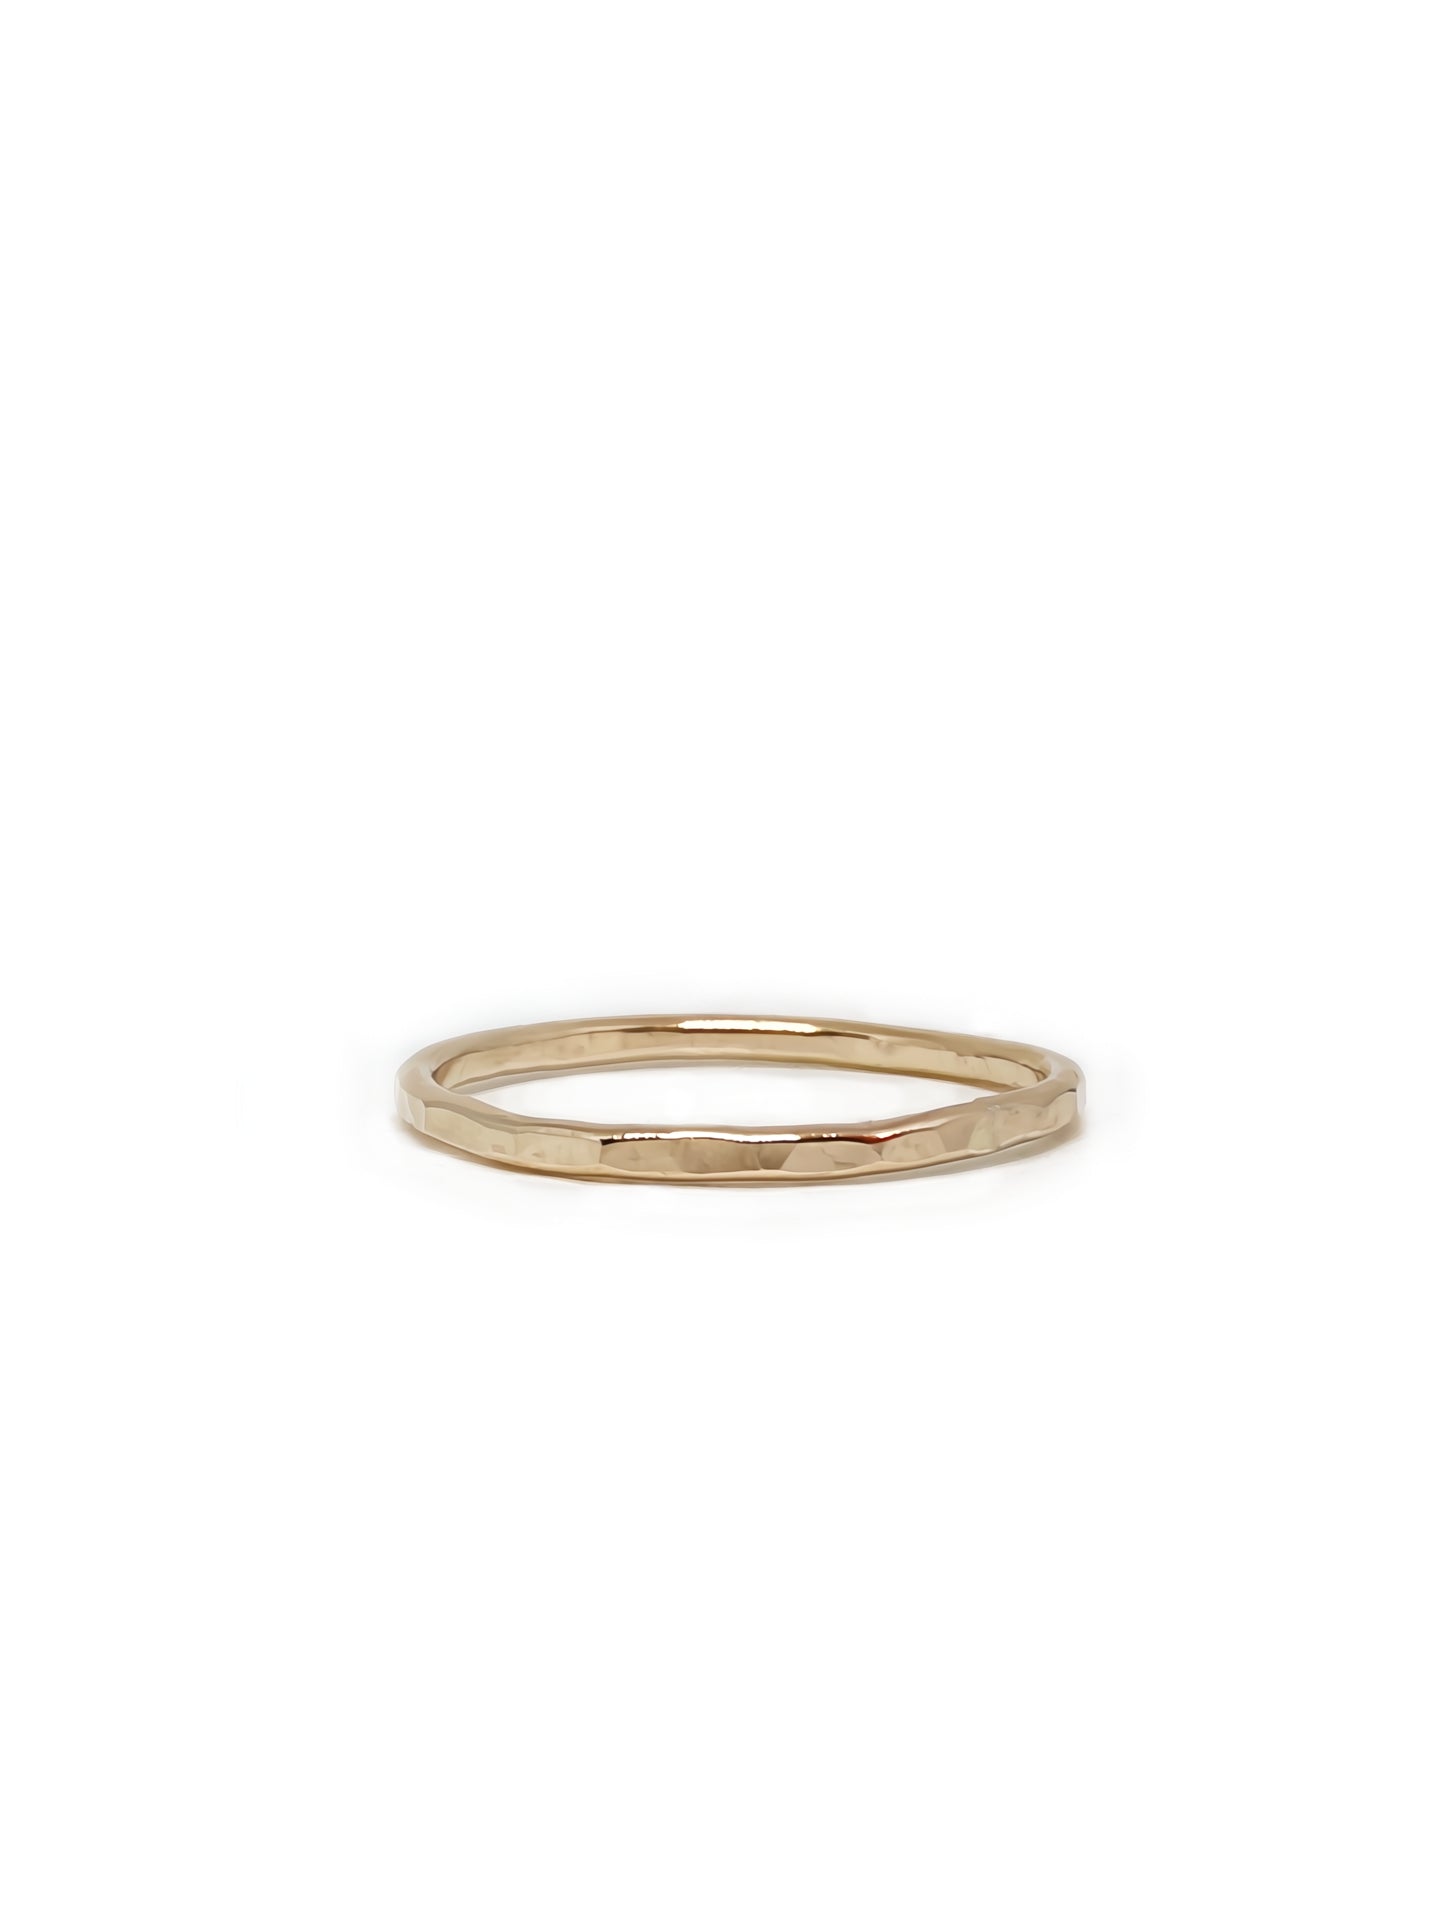 1.3mm Hammered Band Ring in 14K Gold Fill